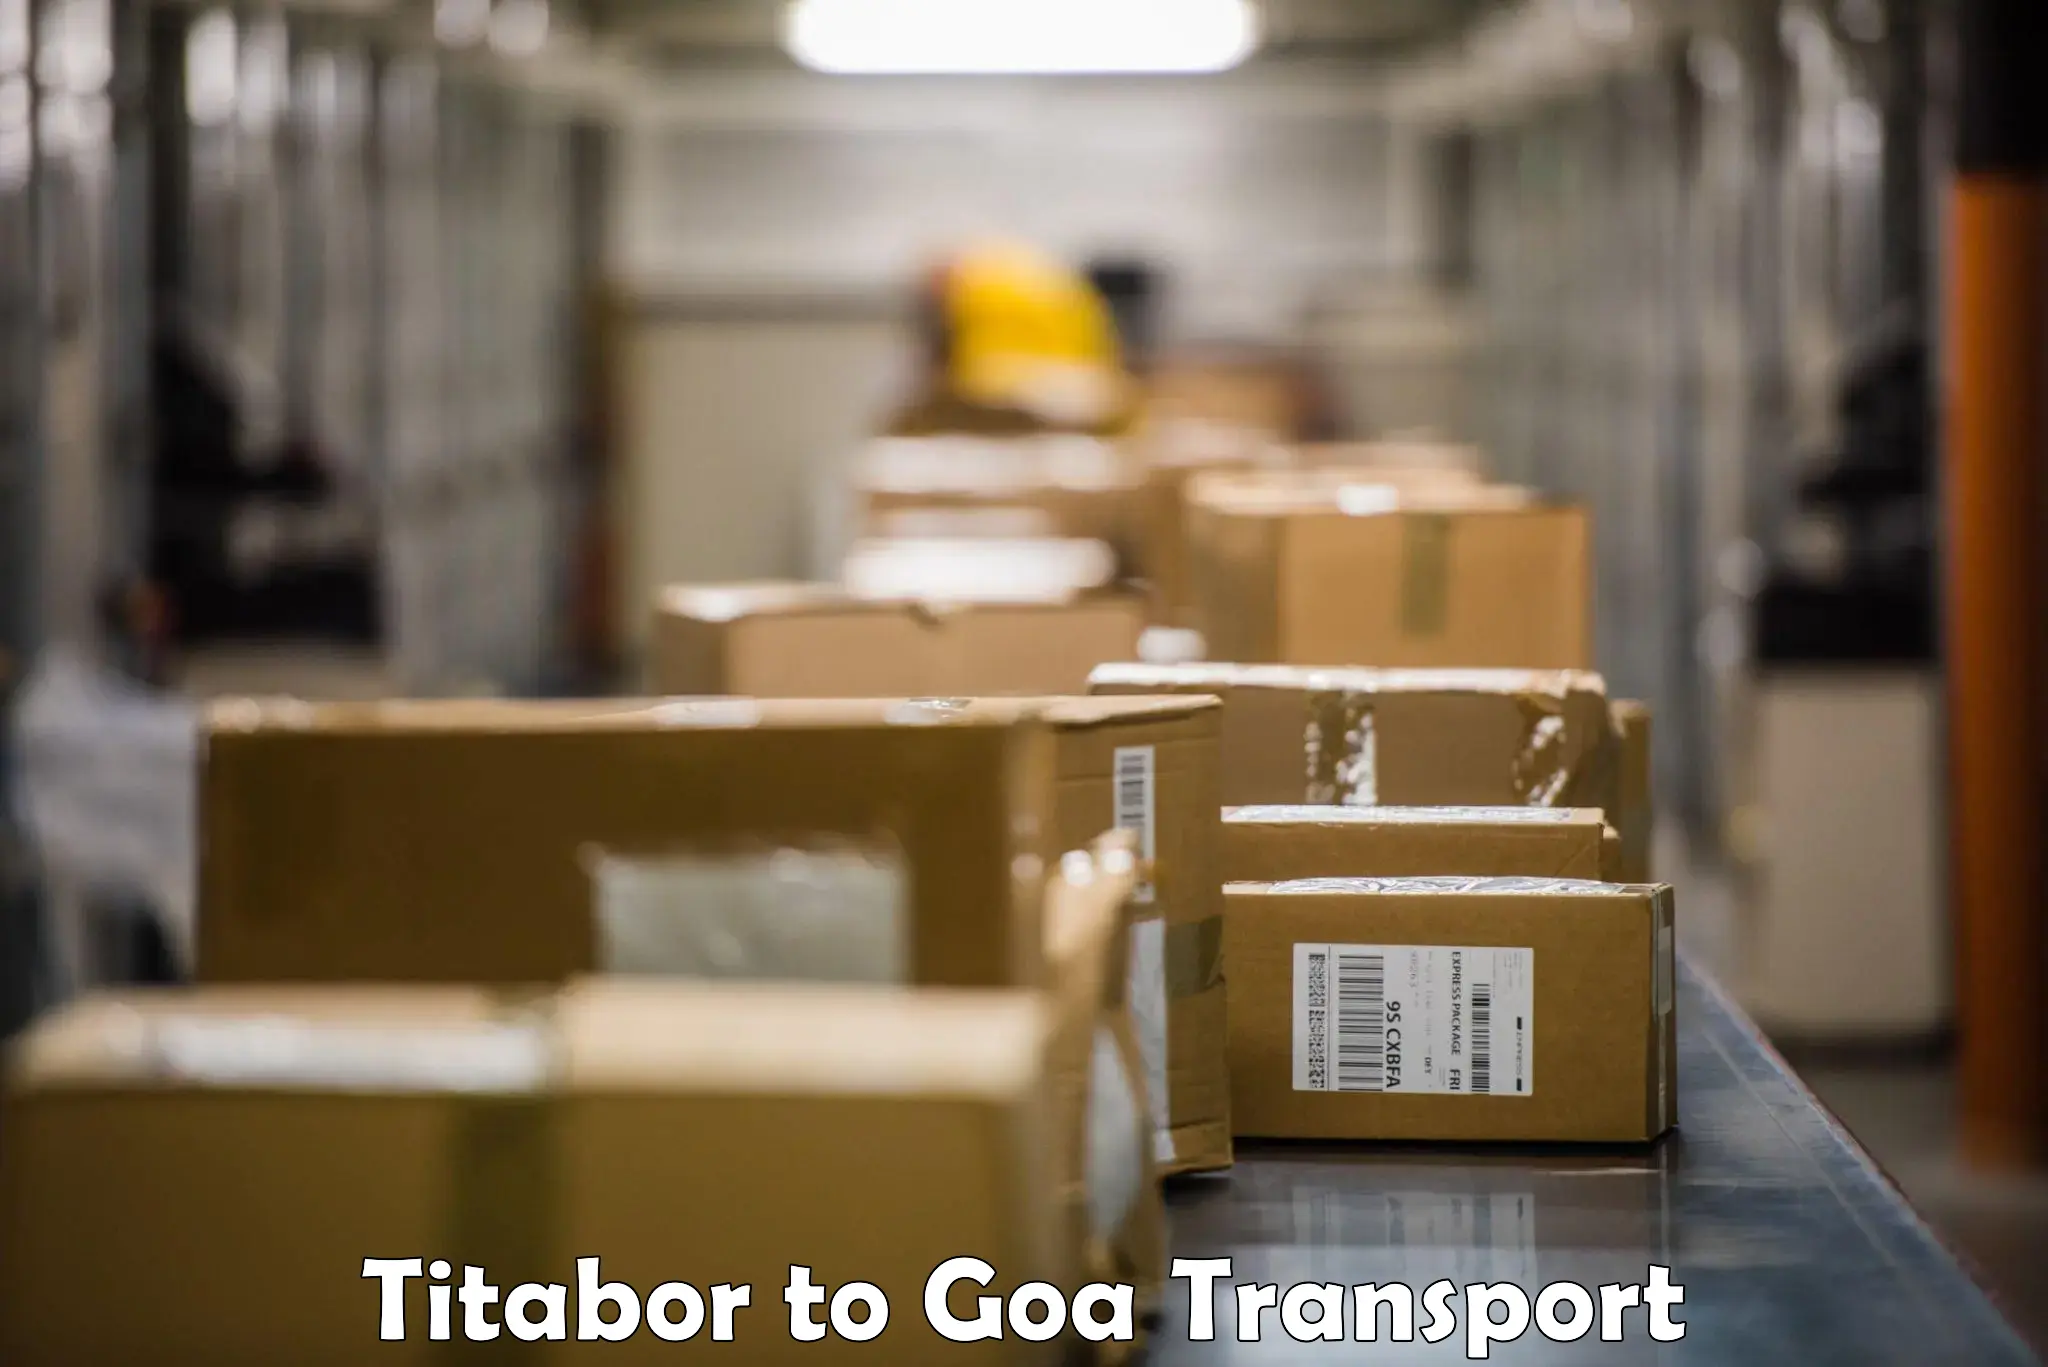 Pick up transport service Titabor to South Goa